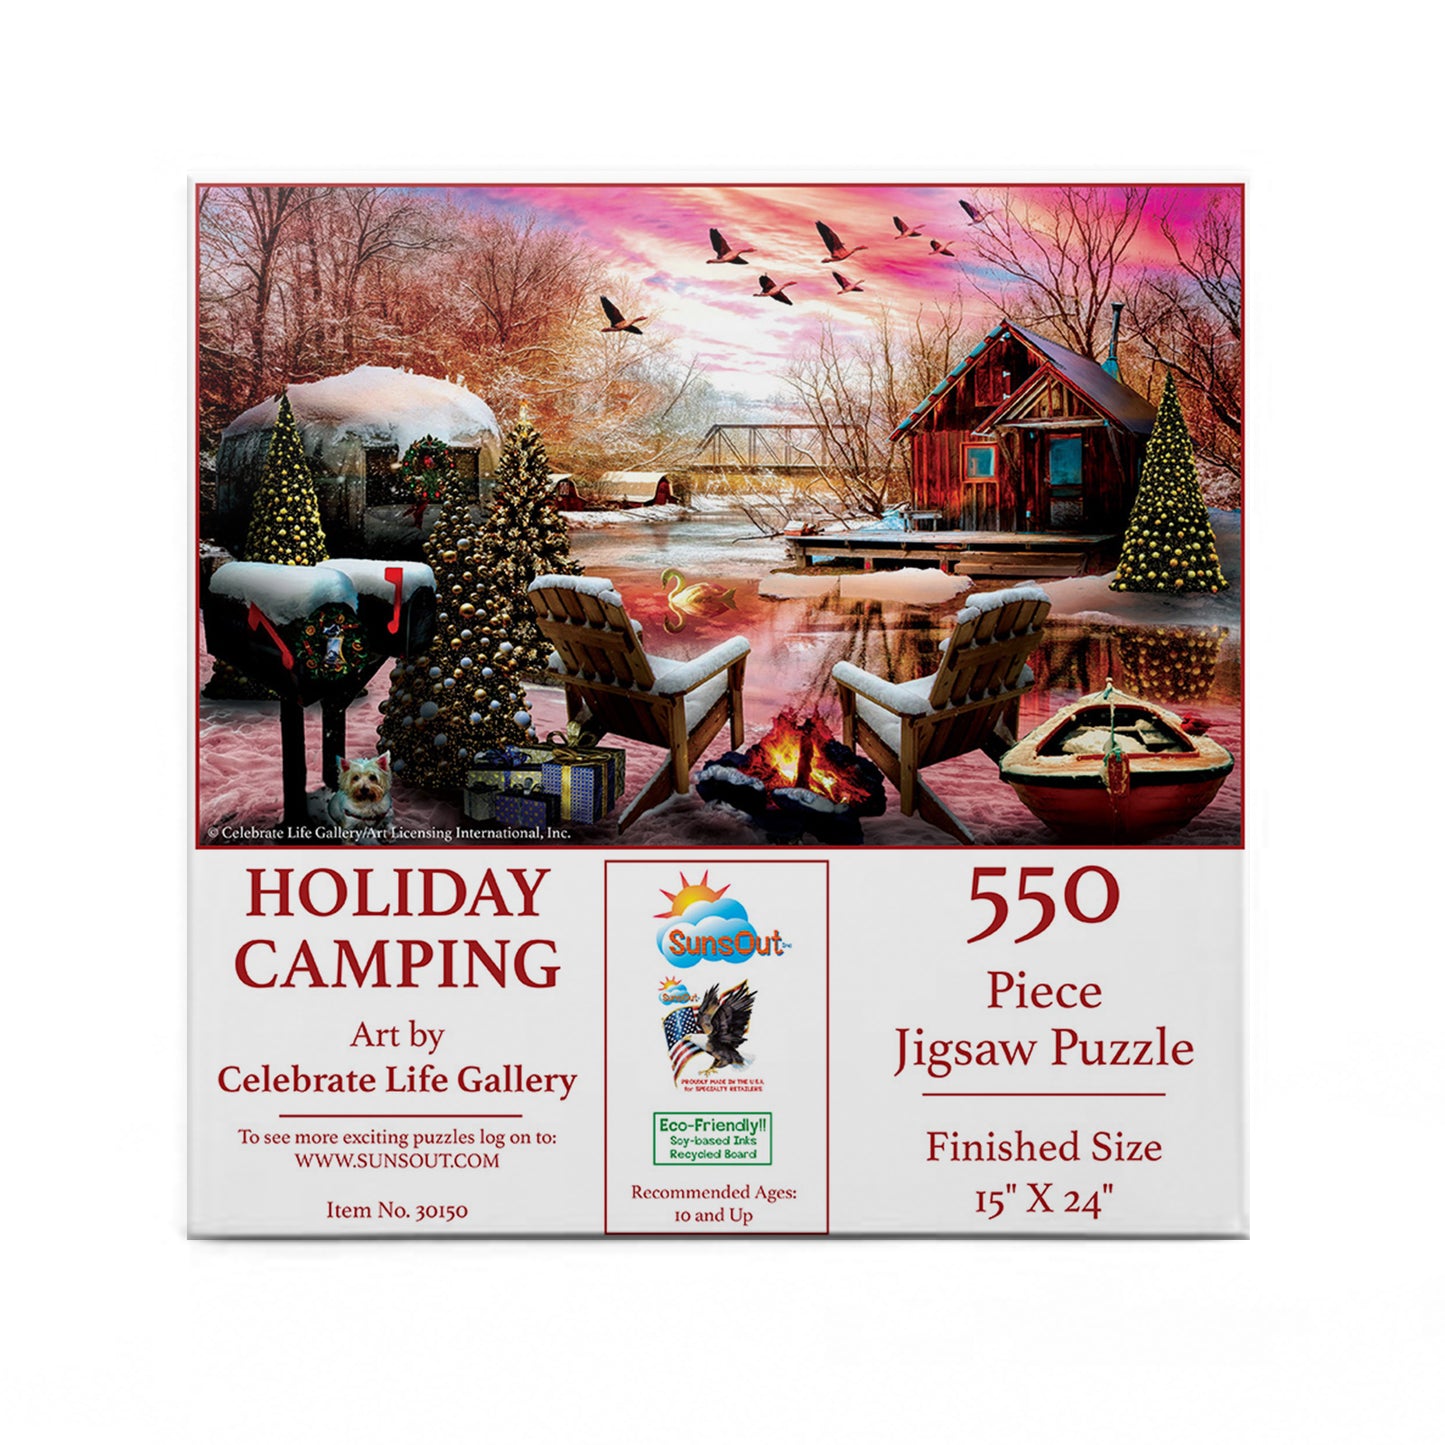 Holiday Camping - 550 Piece Jigsaw Puzzle